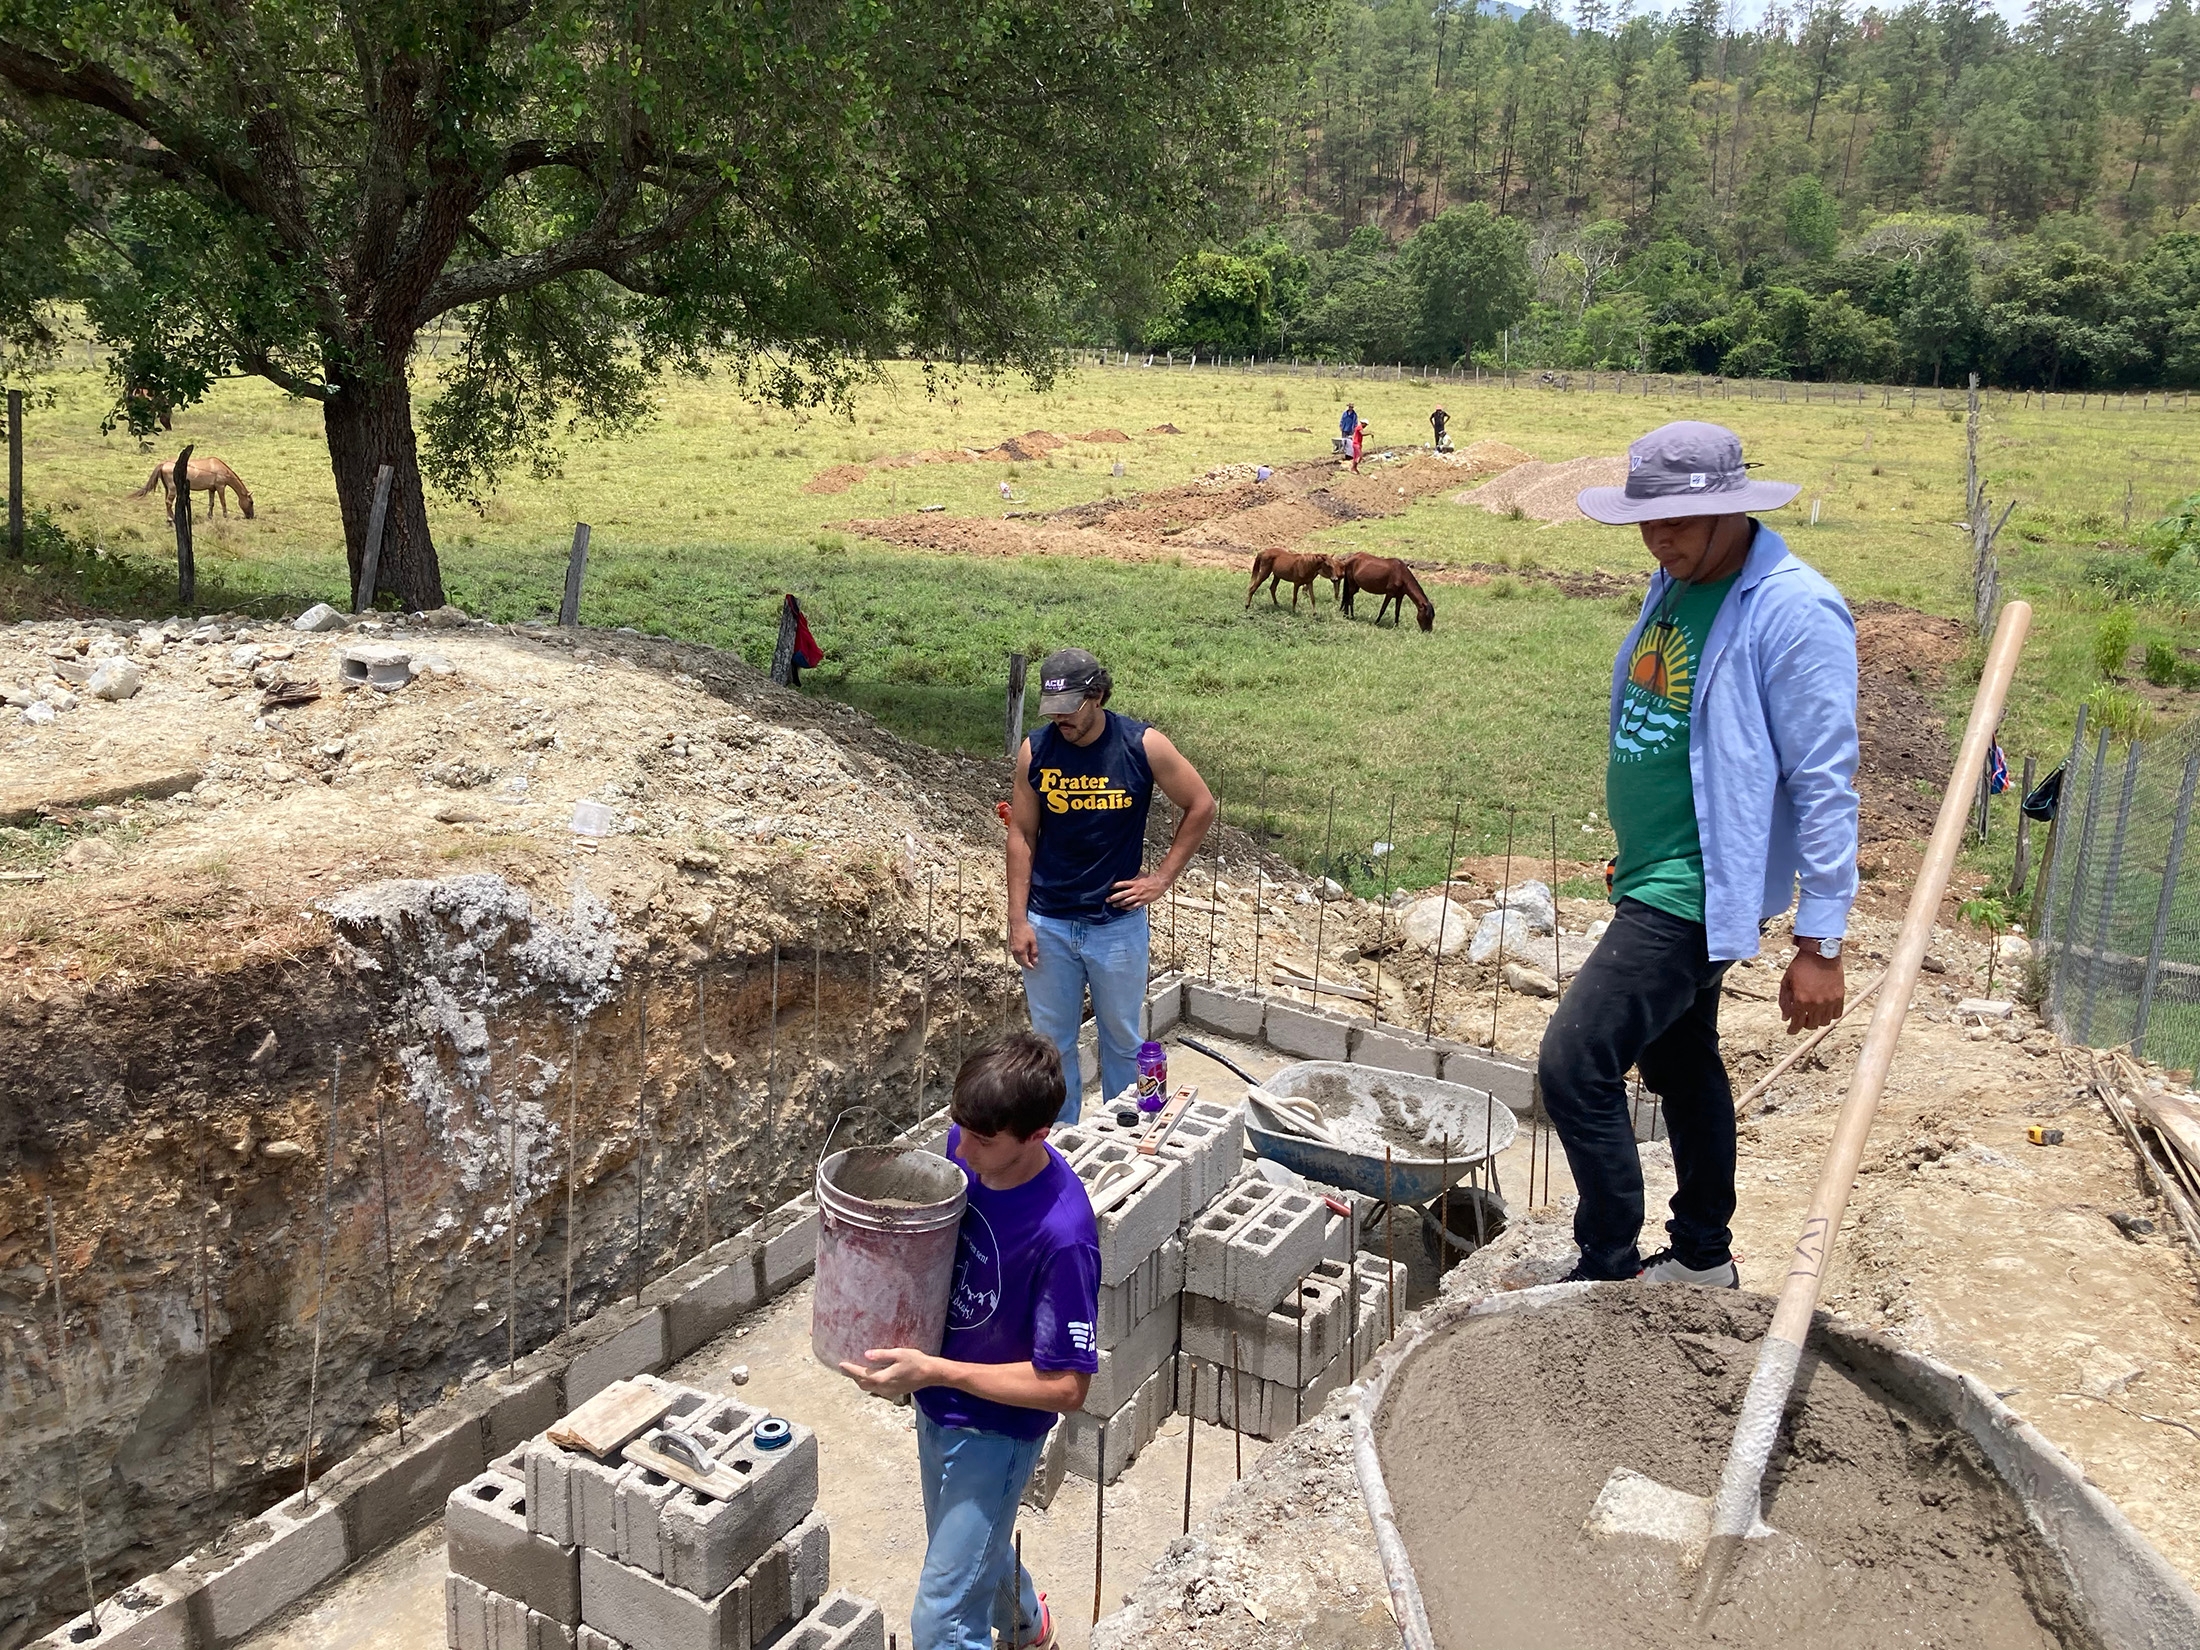 Engineering majors Josh Dowell (front) and Nate Hartin (center back) work with Hondurans to build a wastewater treatment system for a new children’s home.